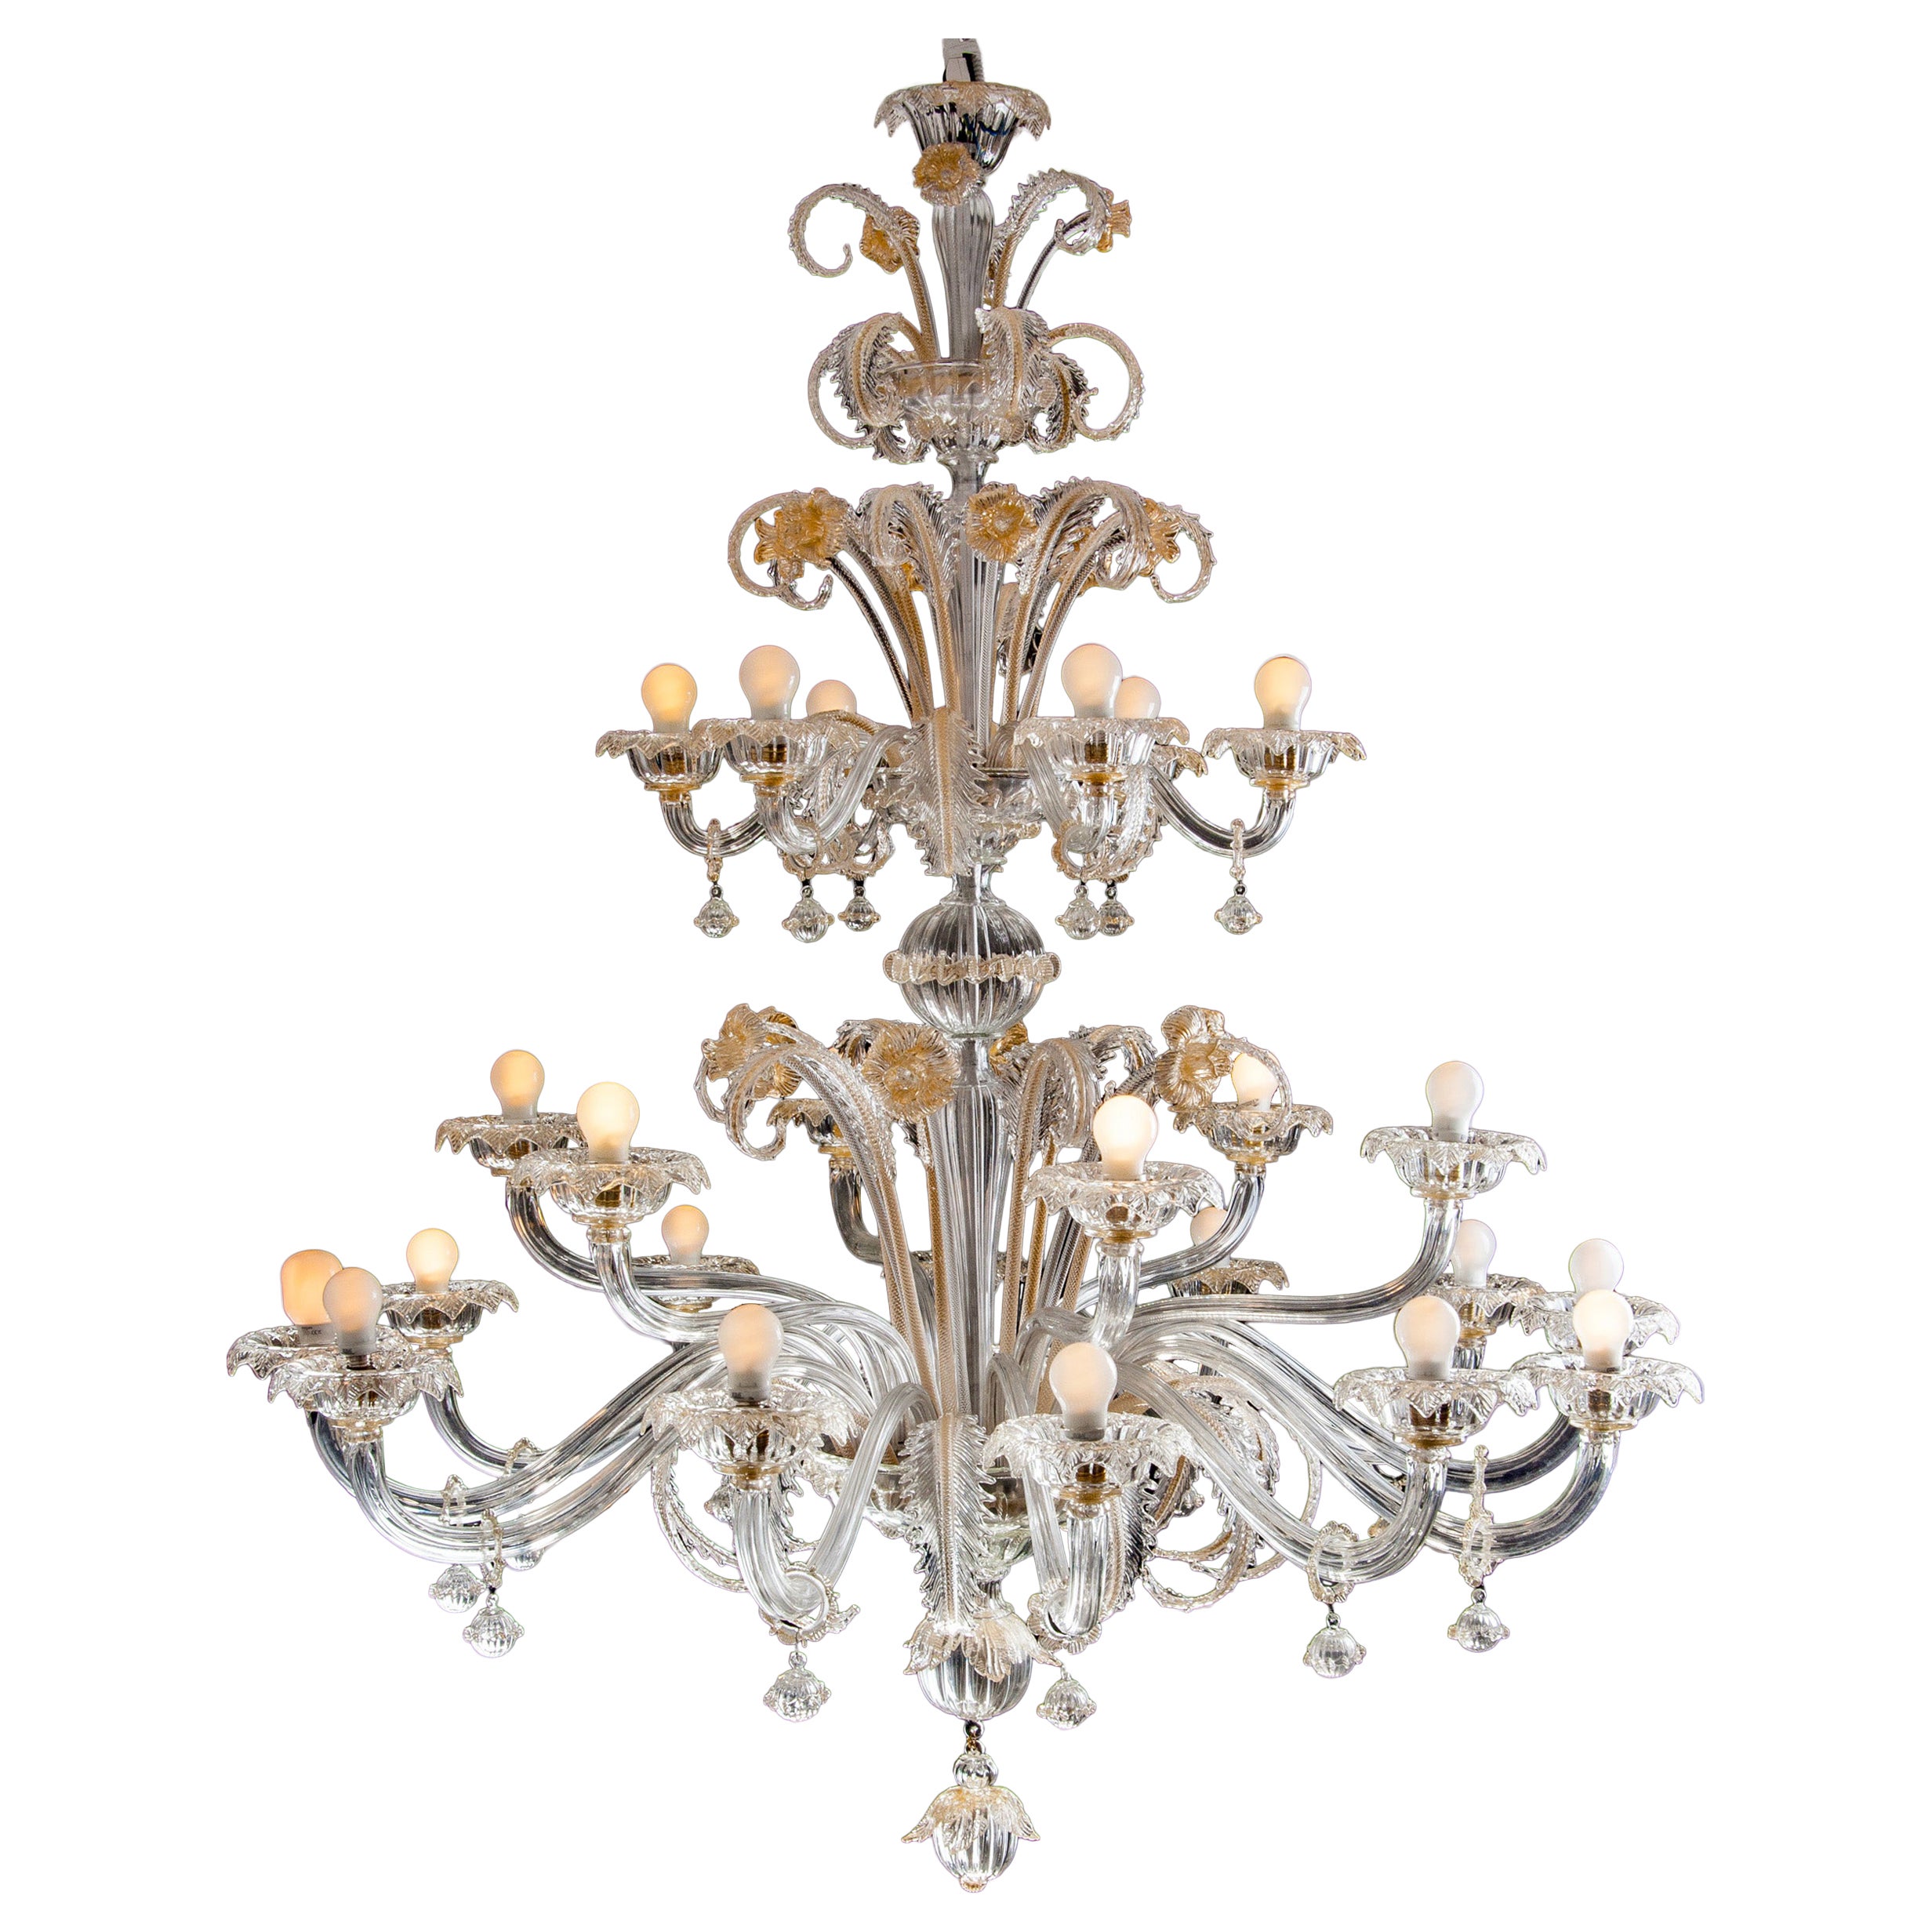 Magnificent Murano Glass Chandeliers by Archimede Seguso, 1960 For Sale